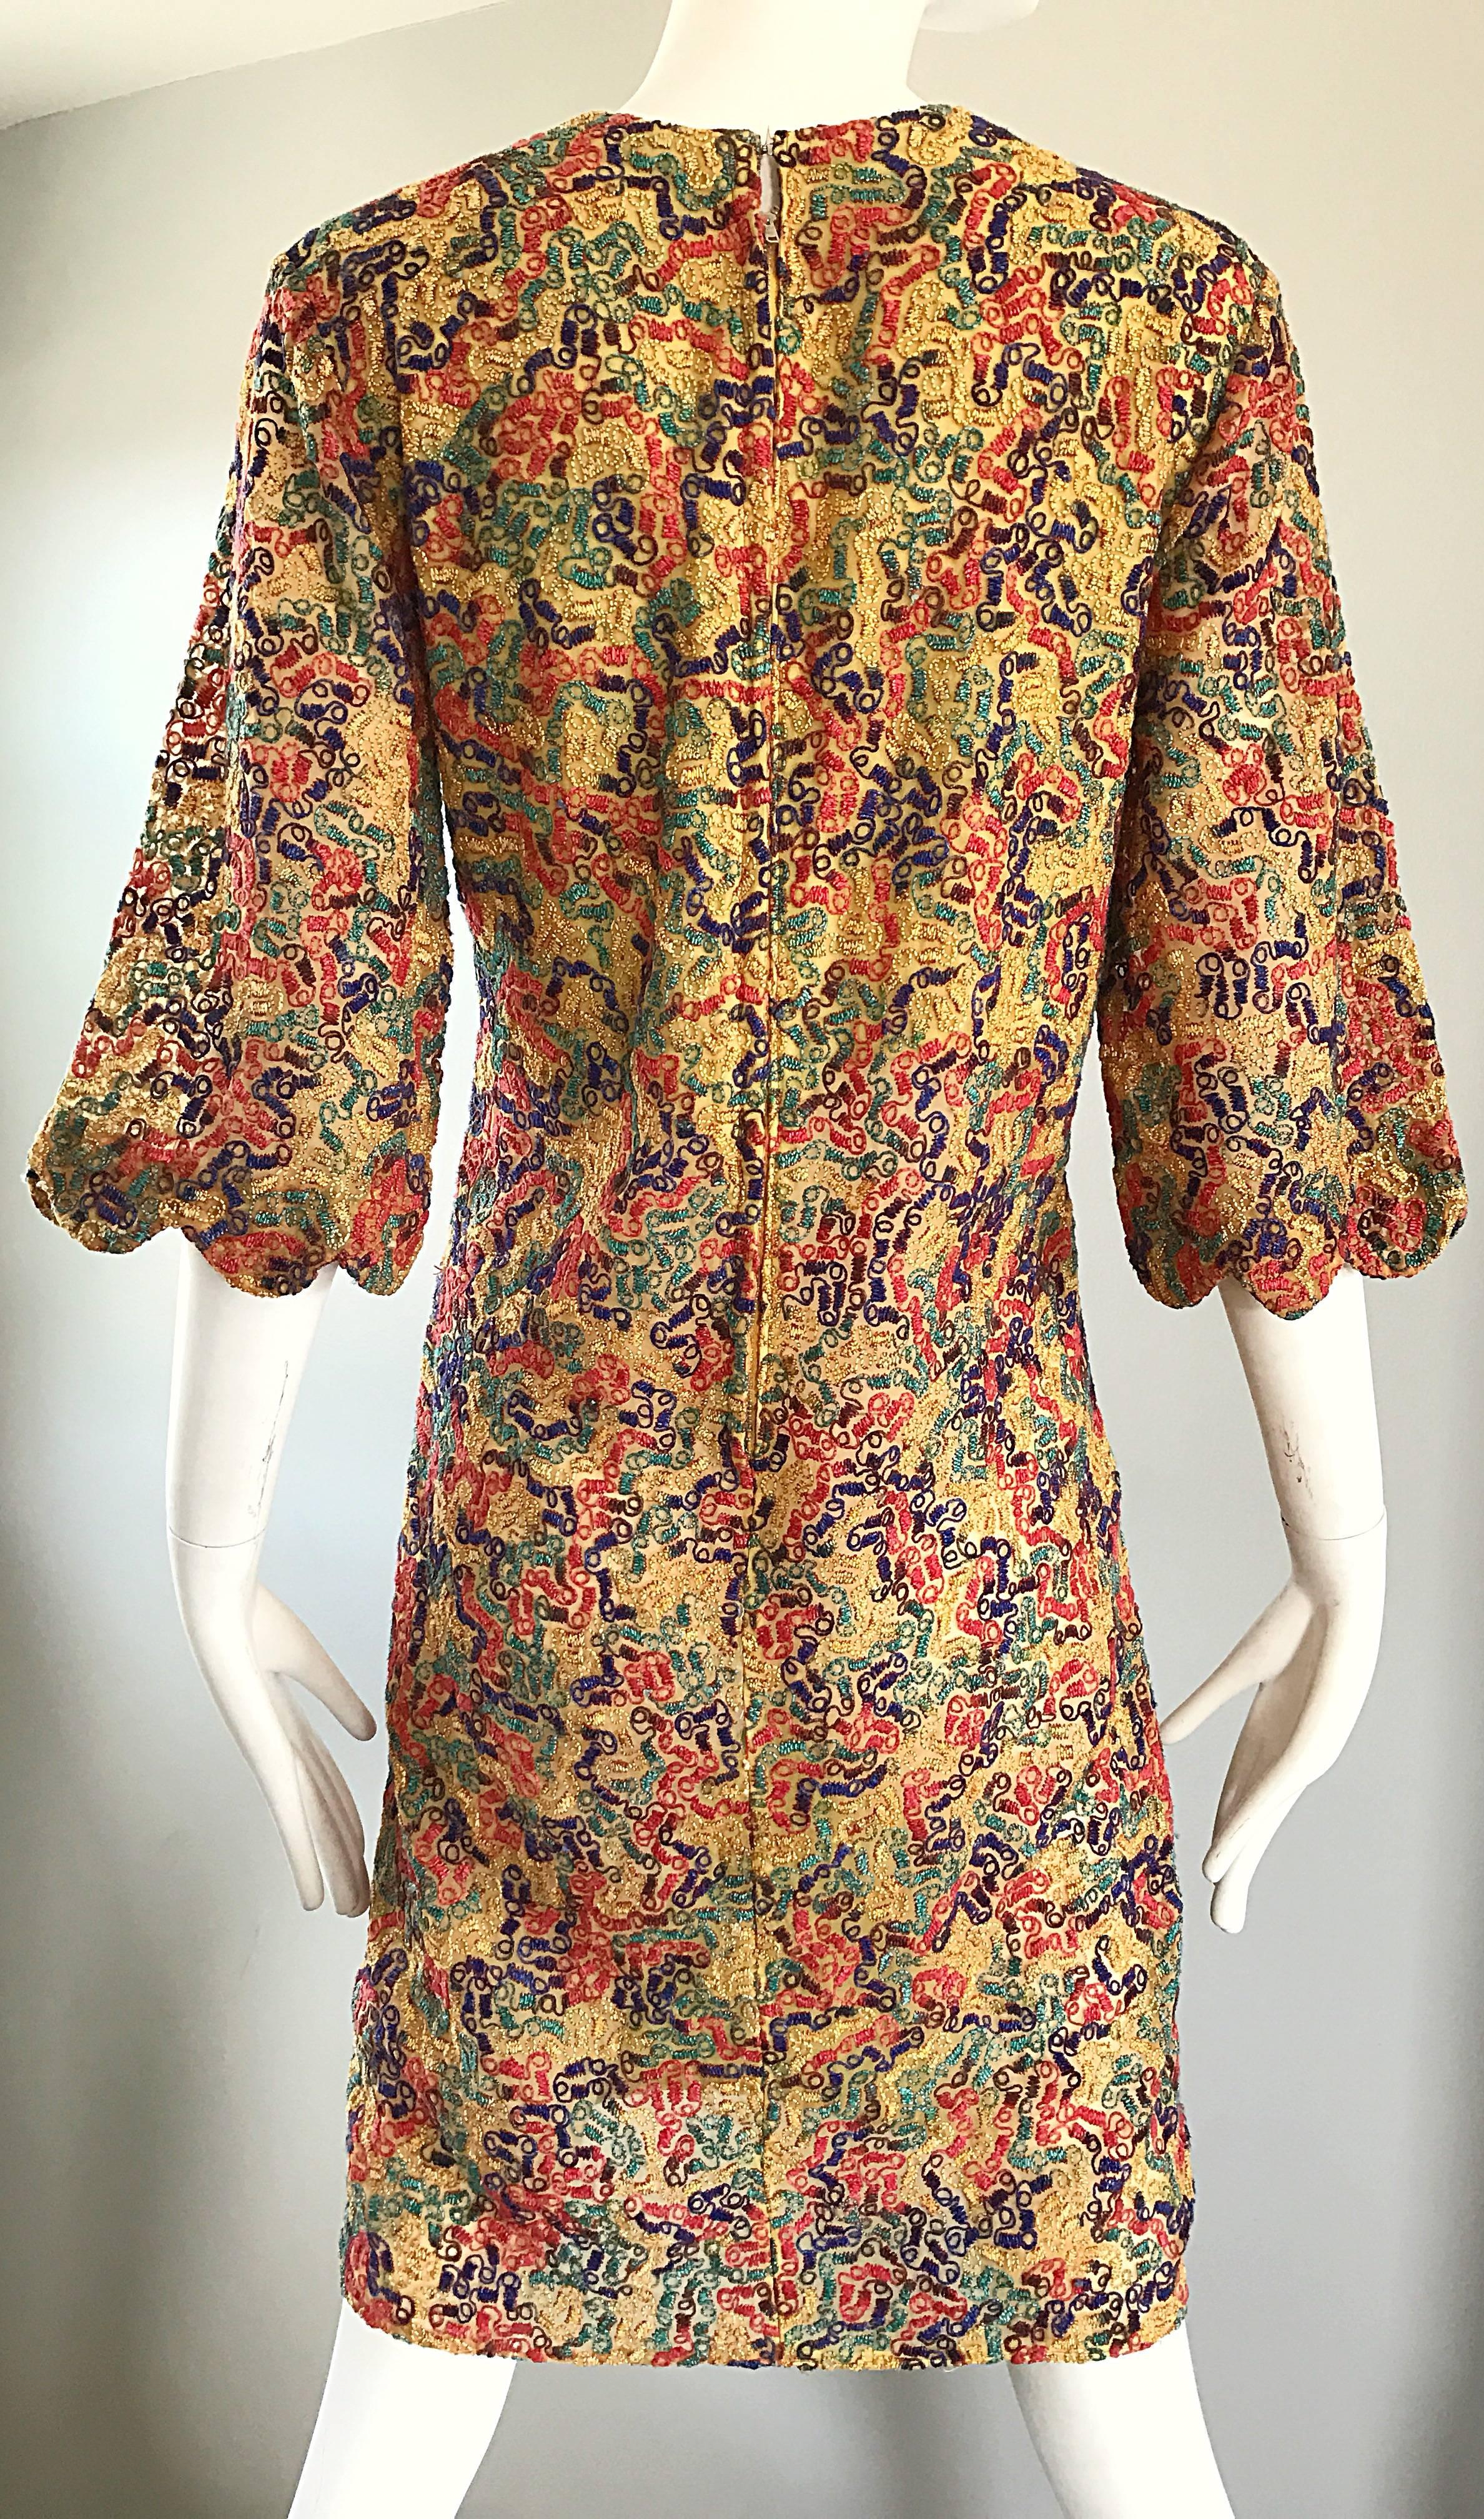 Amazing 1960s Colorful 60s Vintage Mod Shift Dress w/ Scalloped Bell Sleeves For Sale 1